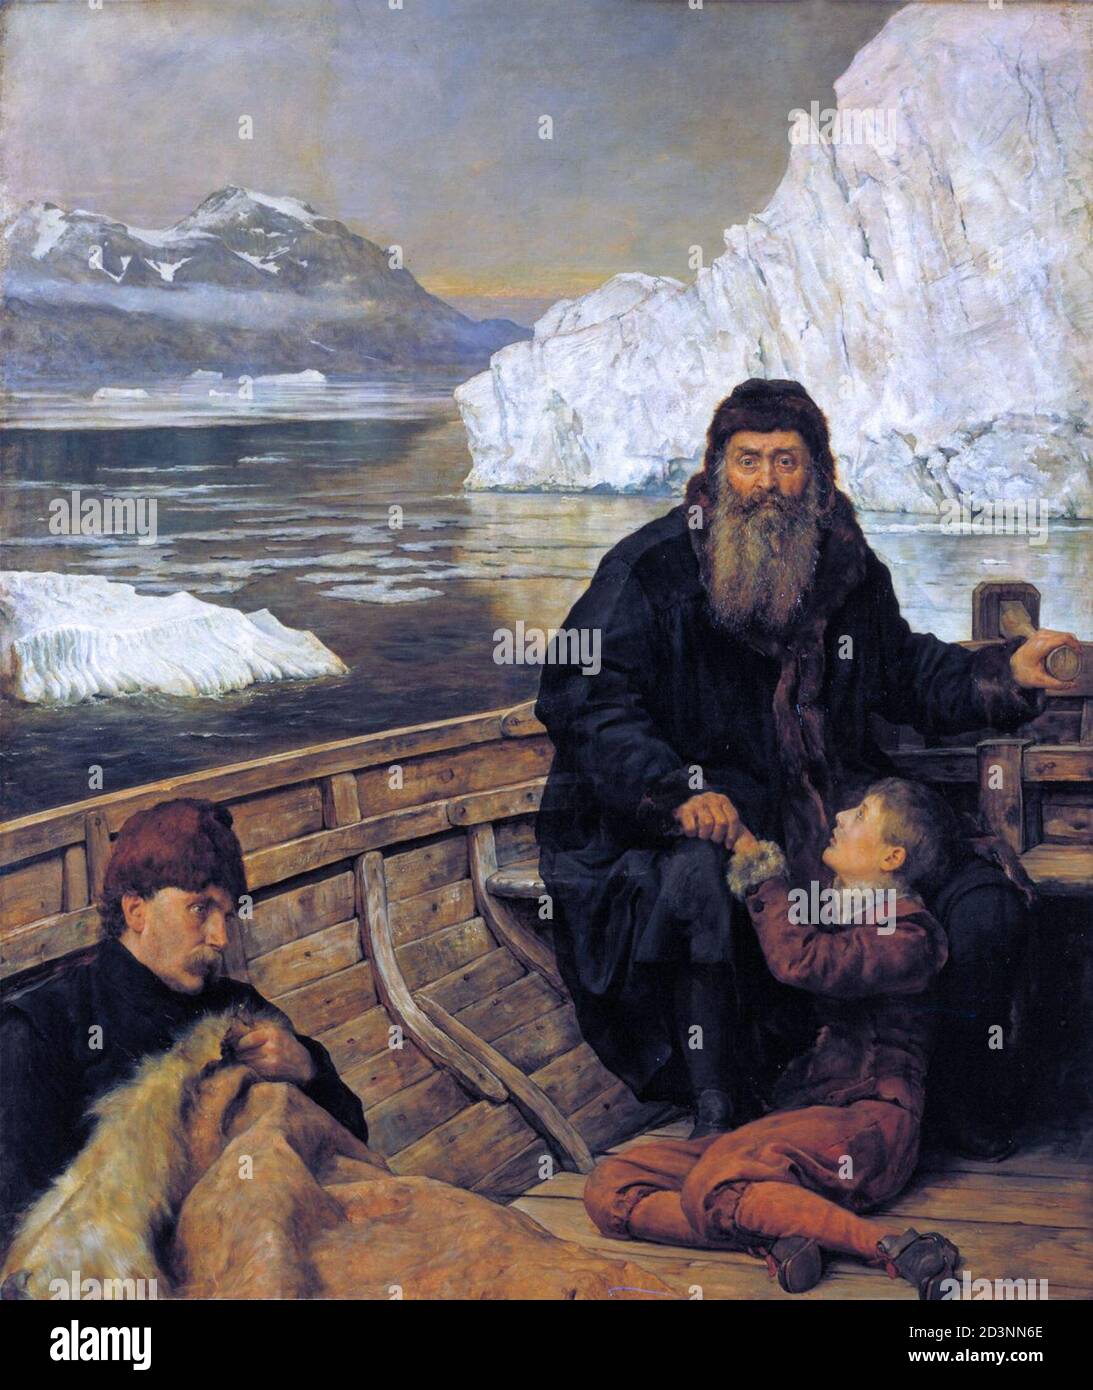 Henry Hudson (1565-1611). The Last Voyage of Henry Hudson by John Collier (1850–1934), oil on canvas, 1881. Hudson, an English explorer, is best known for his explorations of present-day Canada and parts of the northeastern United States Stock Photo